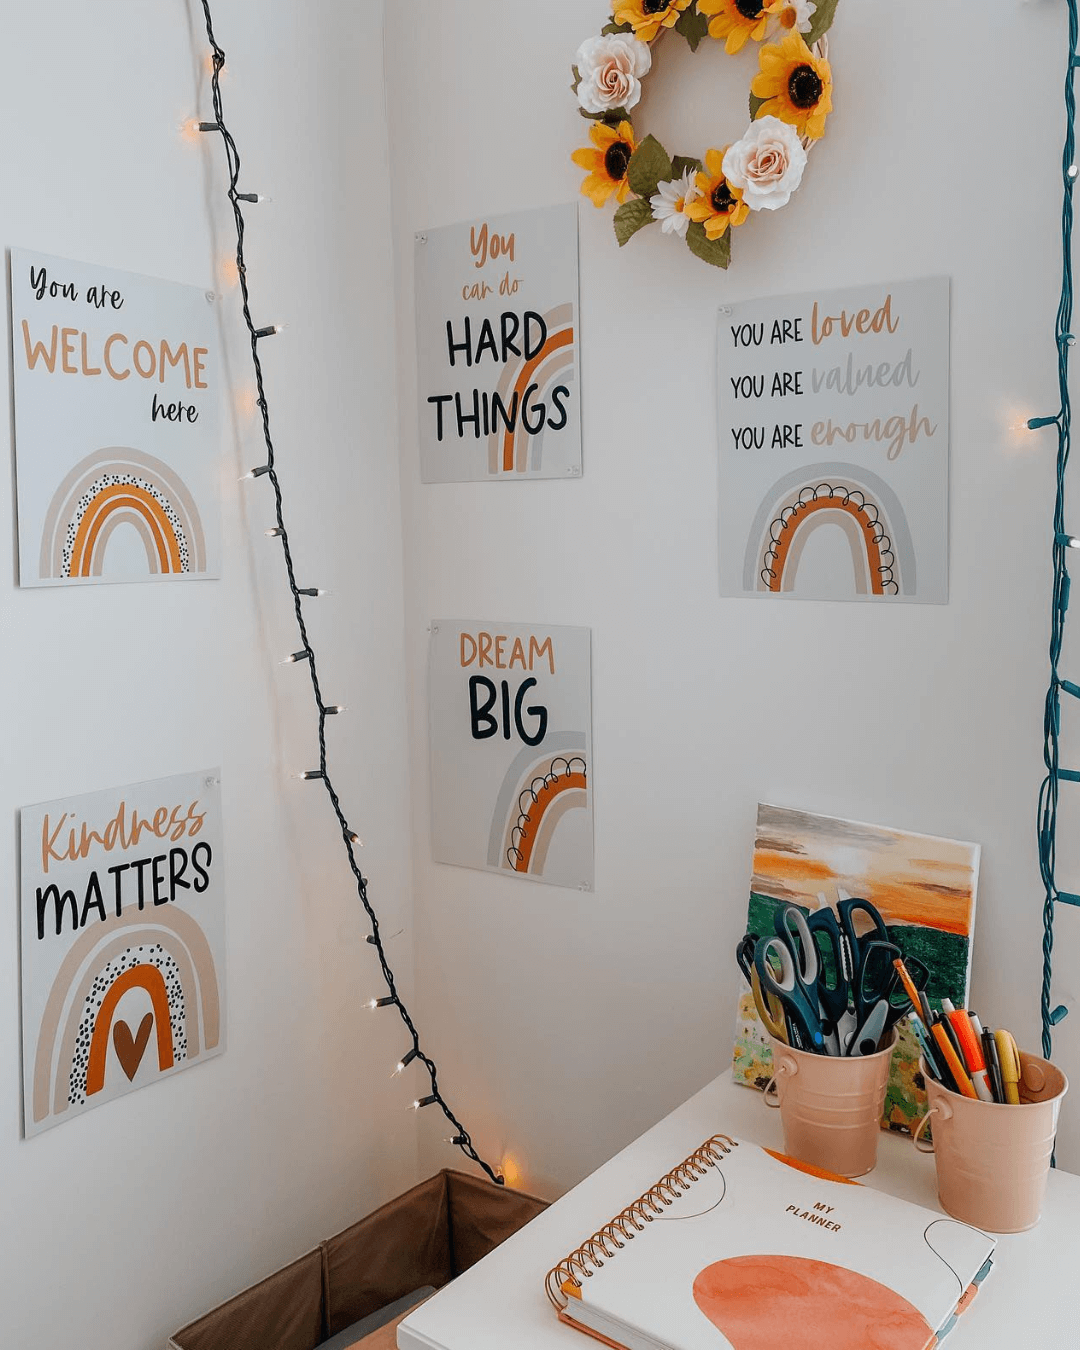 The left image shows a Growth Mindset display that Chantelle is creating, and the right shows a cosy corner of an office with motivational posters that say phrases like ‘dream big’ and ‘you are welcome here.’